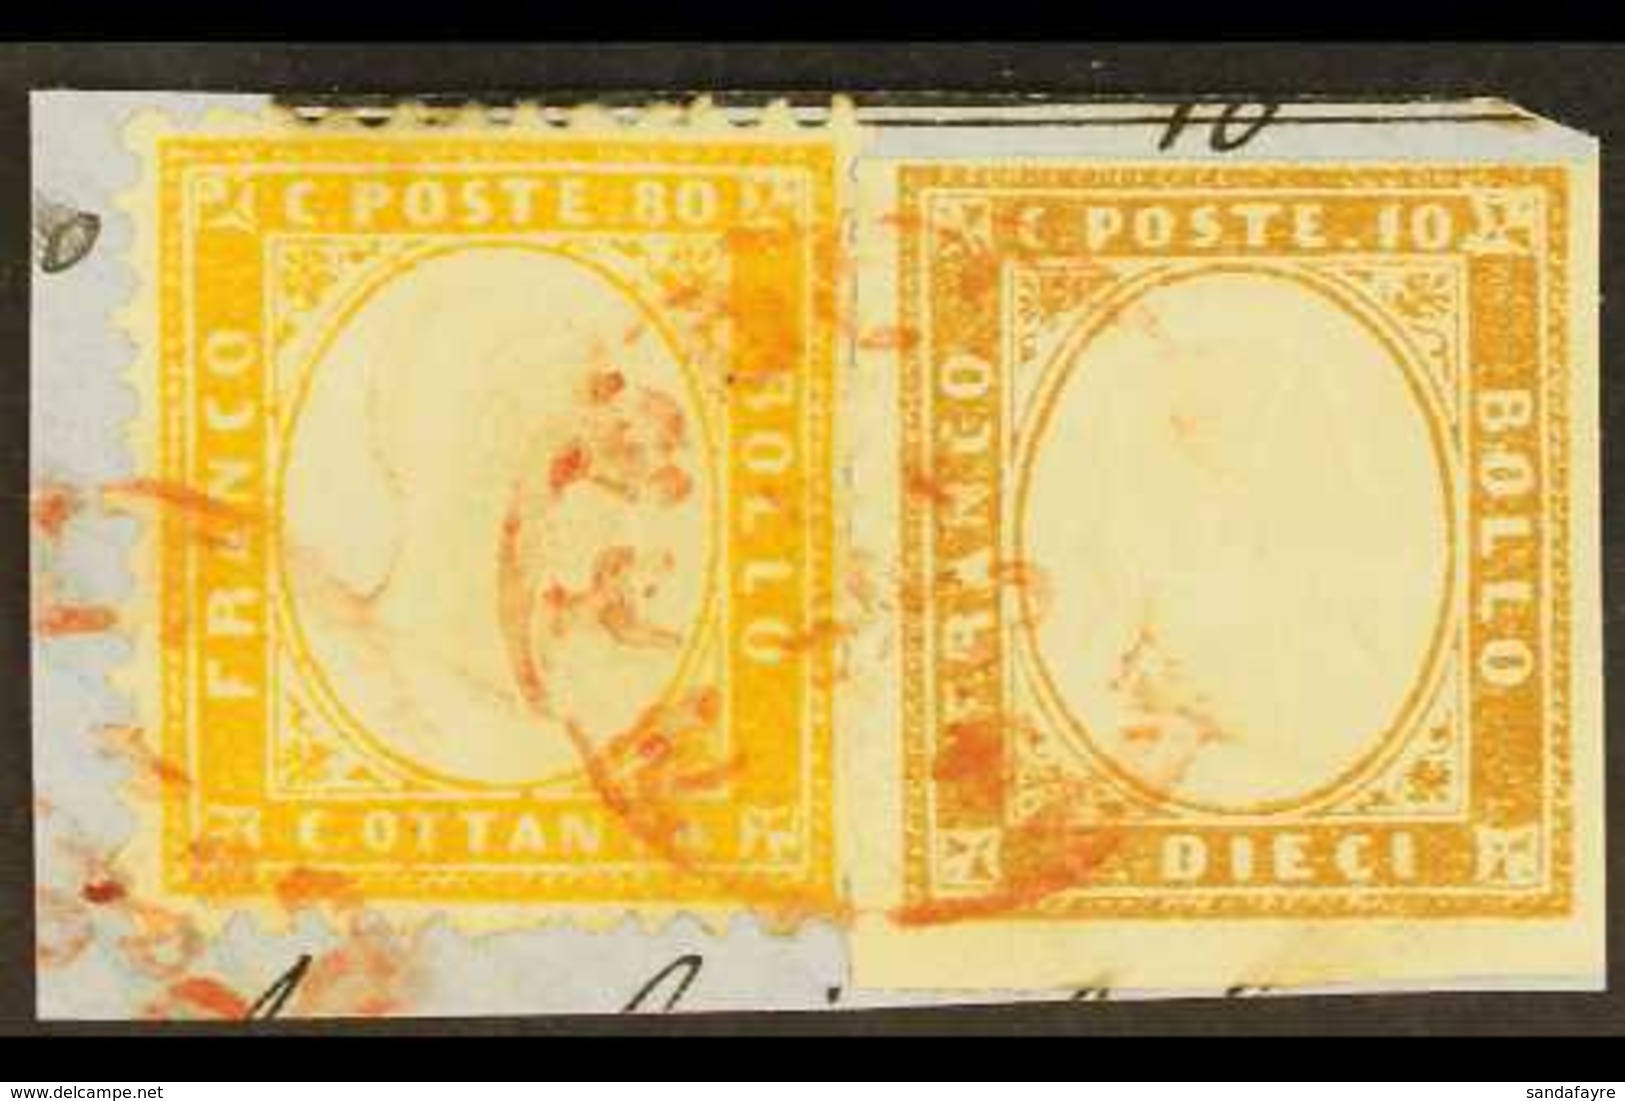 1862 80c Yellow Perf 11½x12 (SG 4, Sassone 4) And Sardinia 1861-63 10c Bistre Imperf (SG 40, Sassone 15E), Together Used - Sin Clasificación